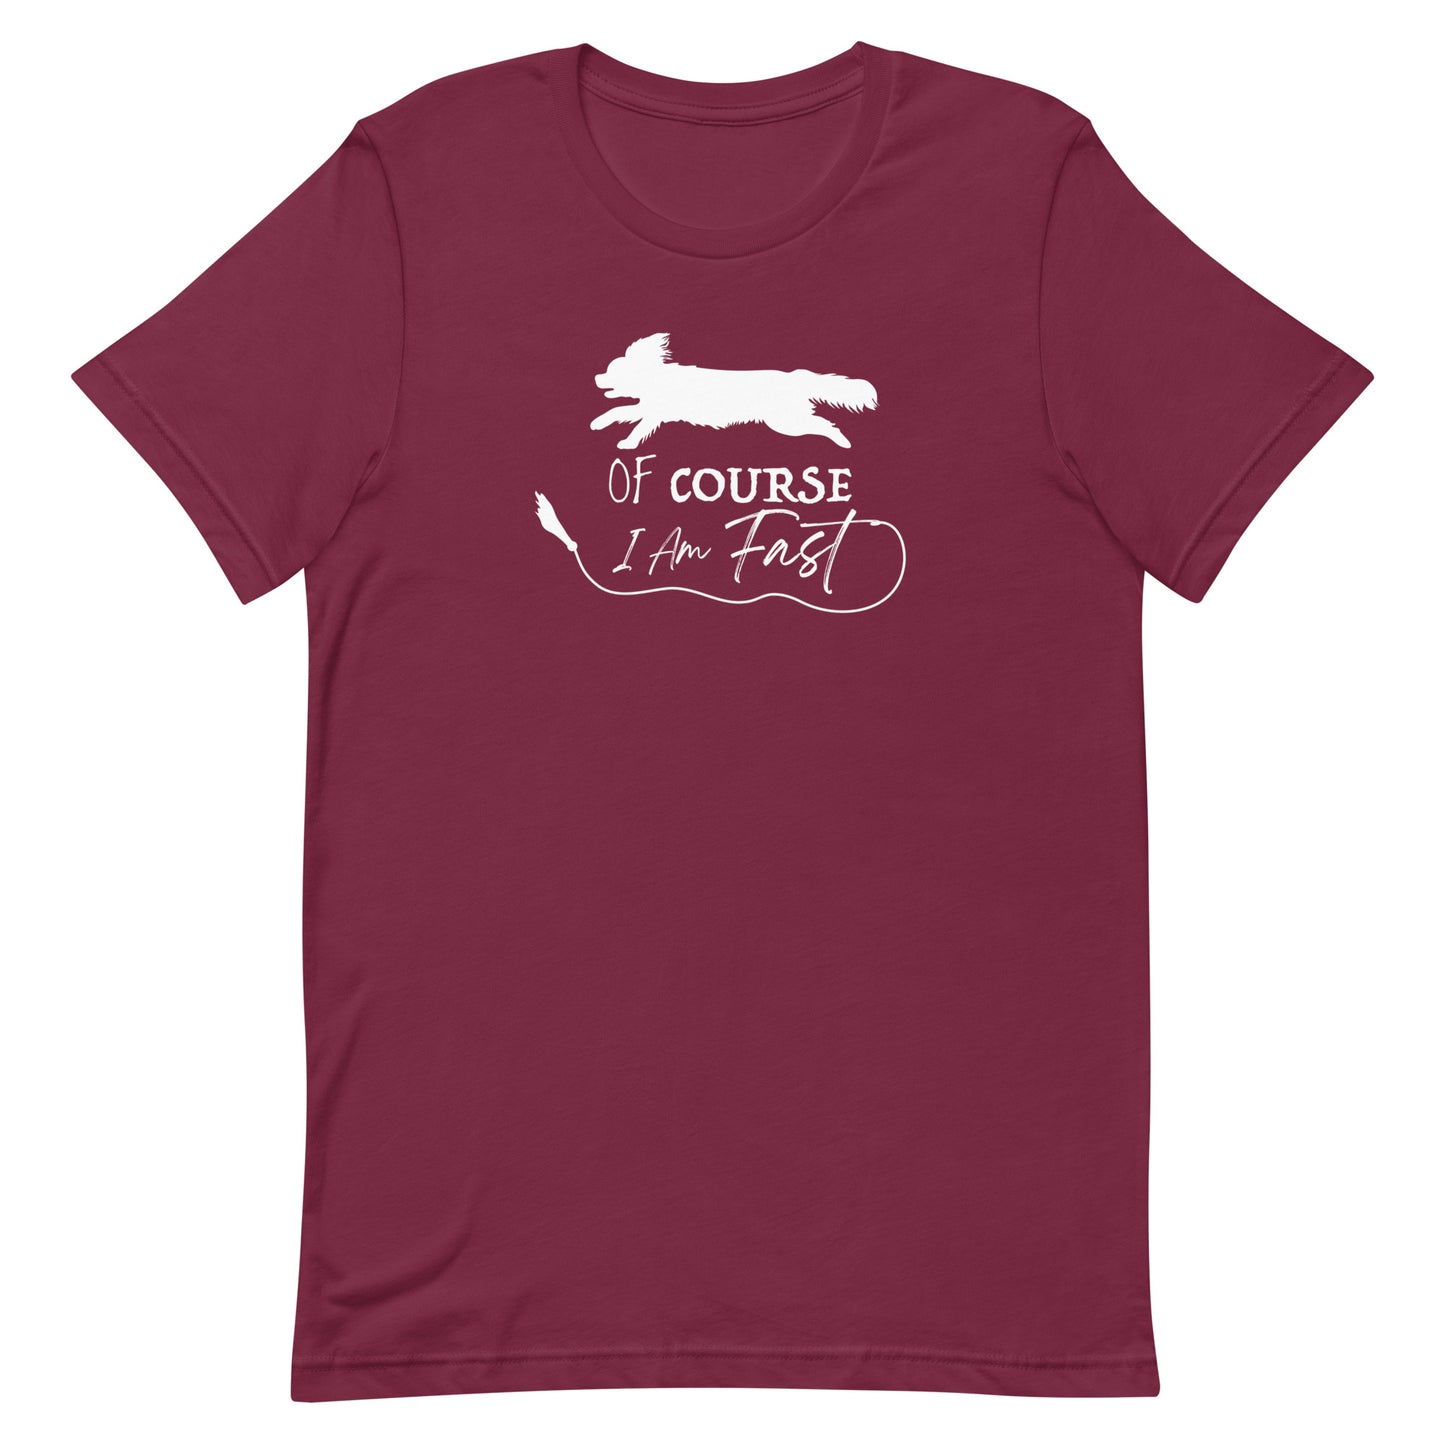 OF COURSE FAST - Cavalier King Charles - Unisex t-shirt